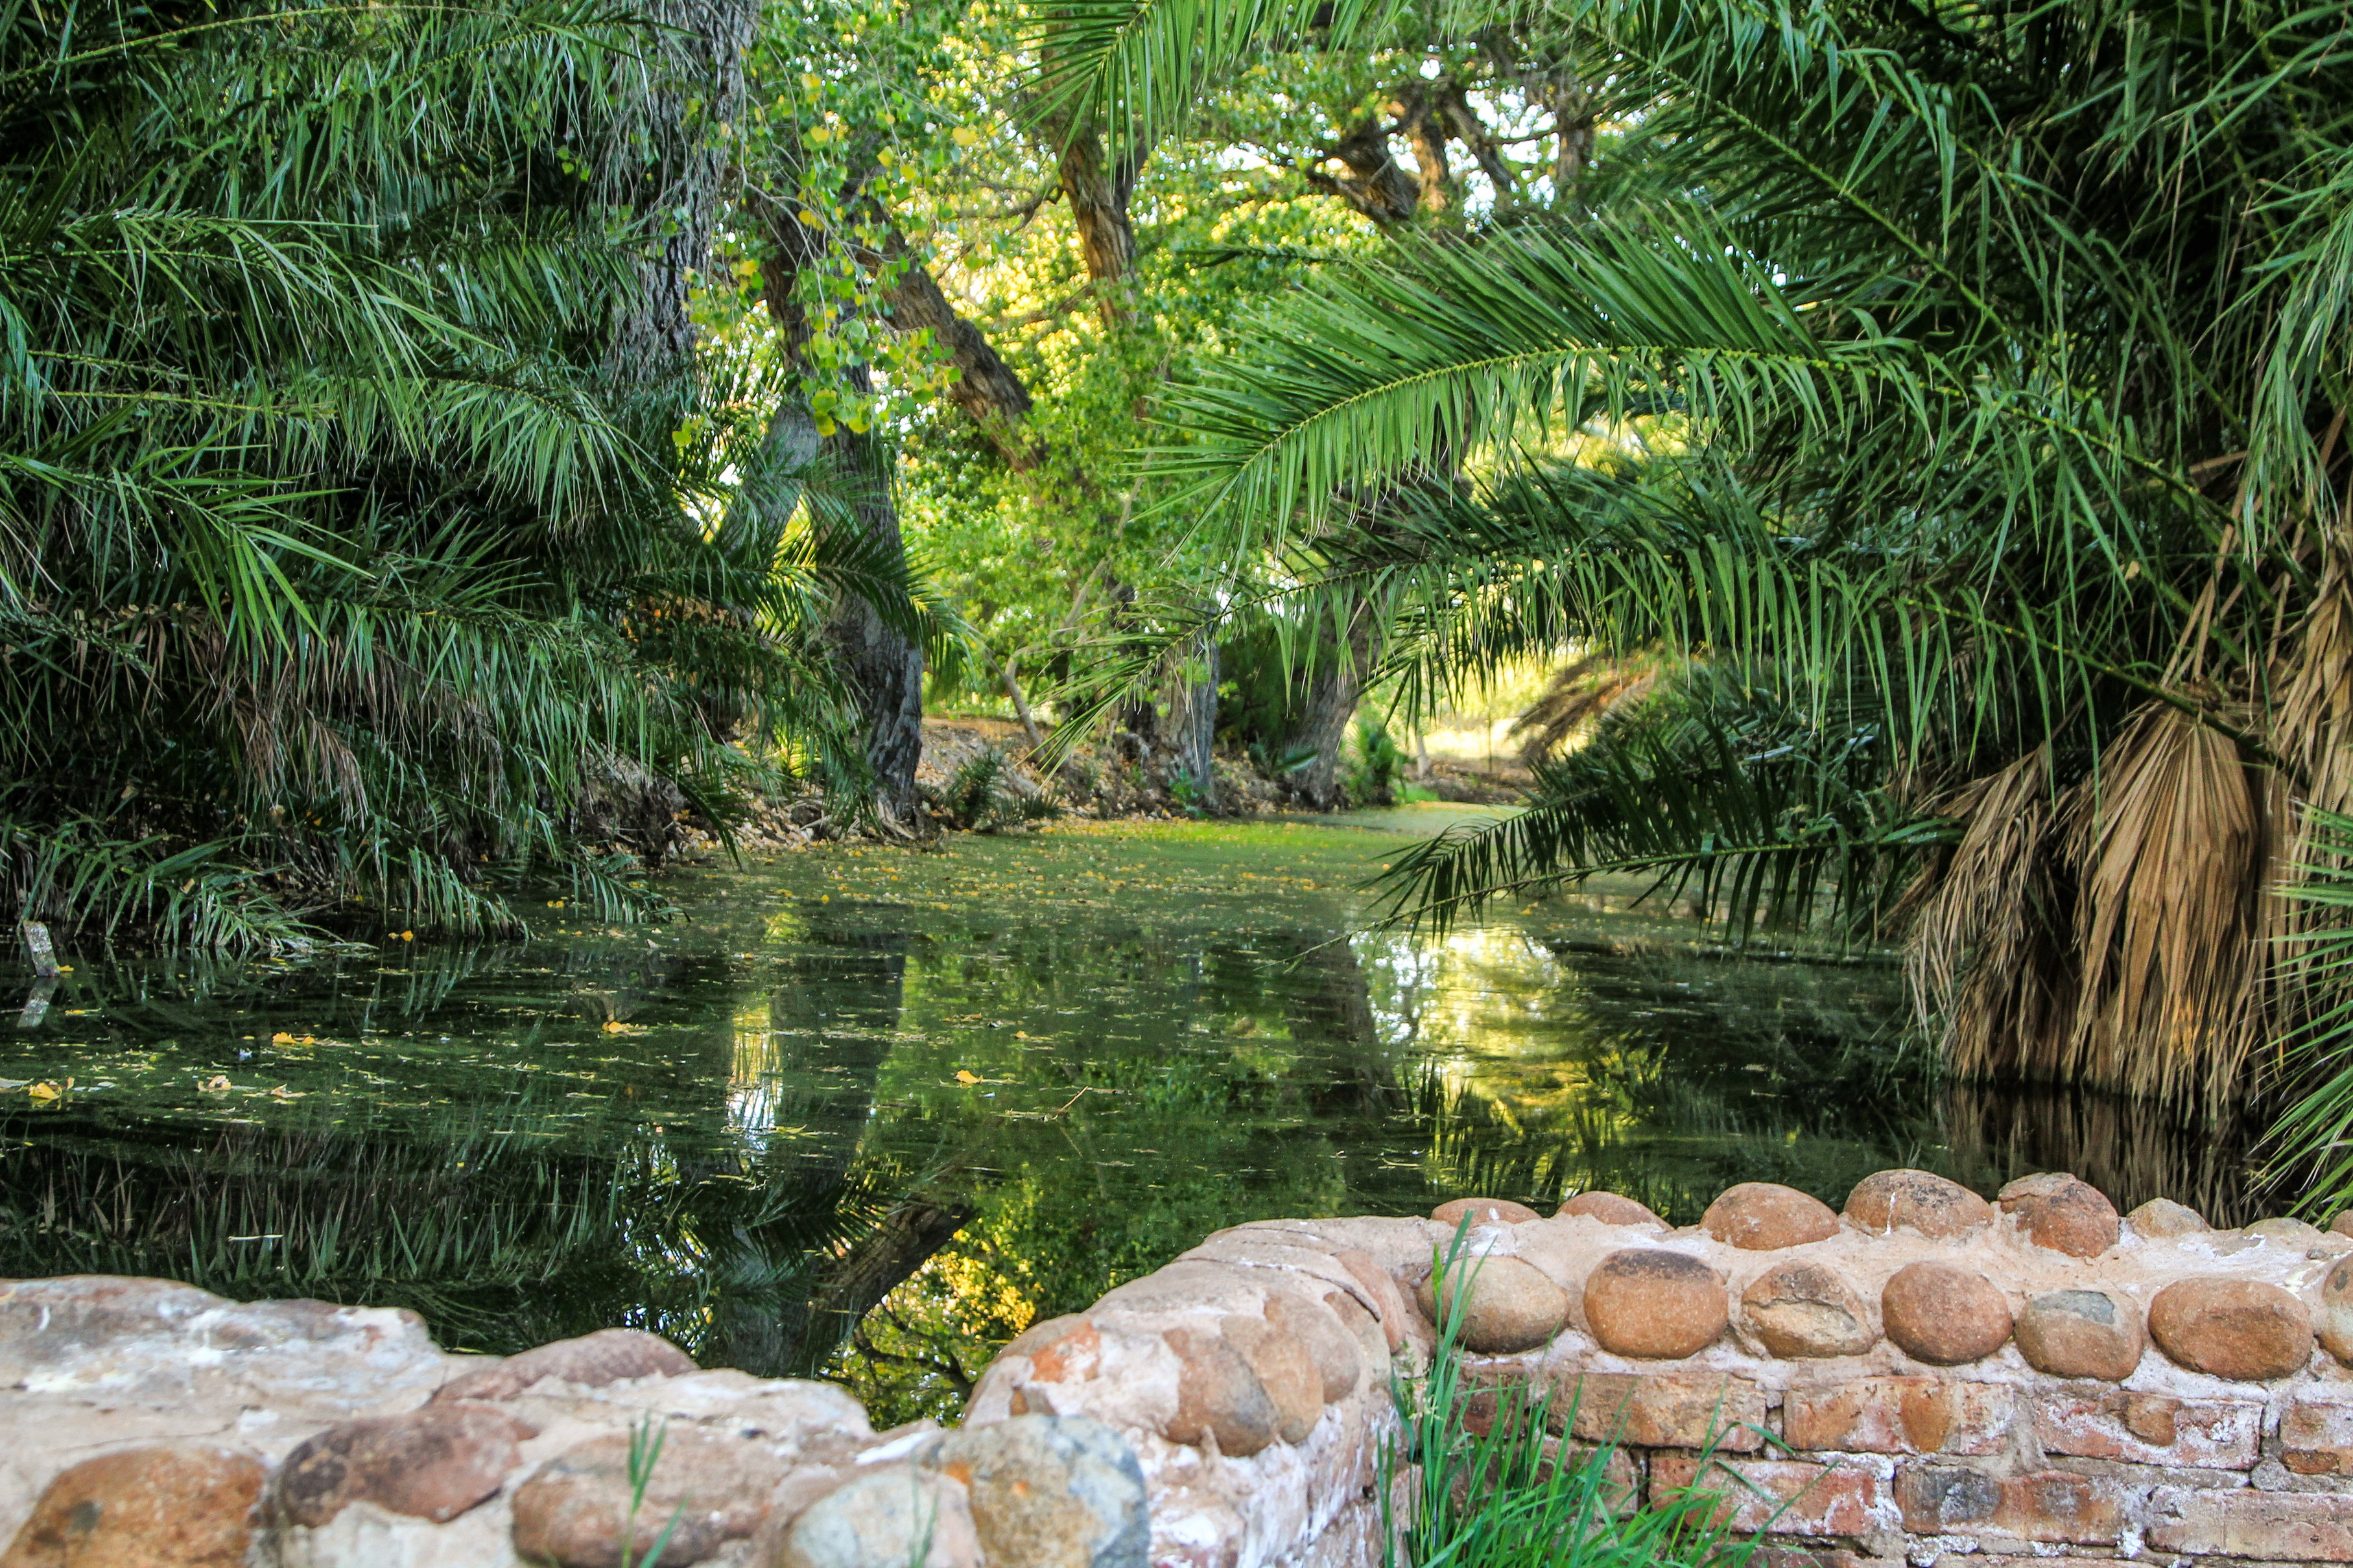 The natural spring that supplies Vosburg.